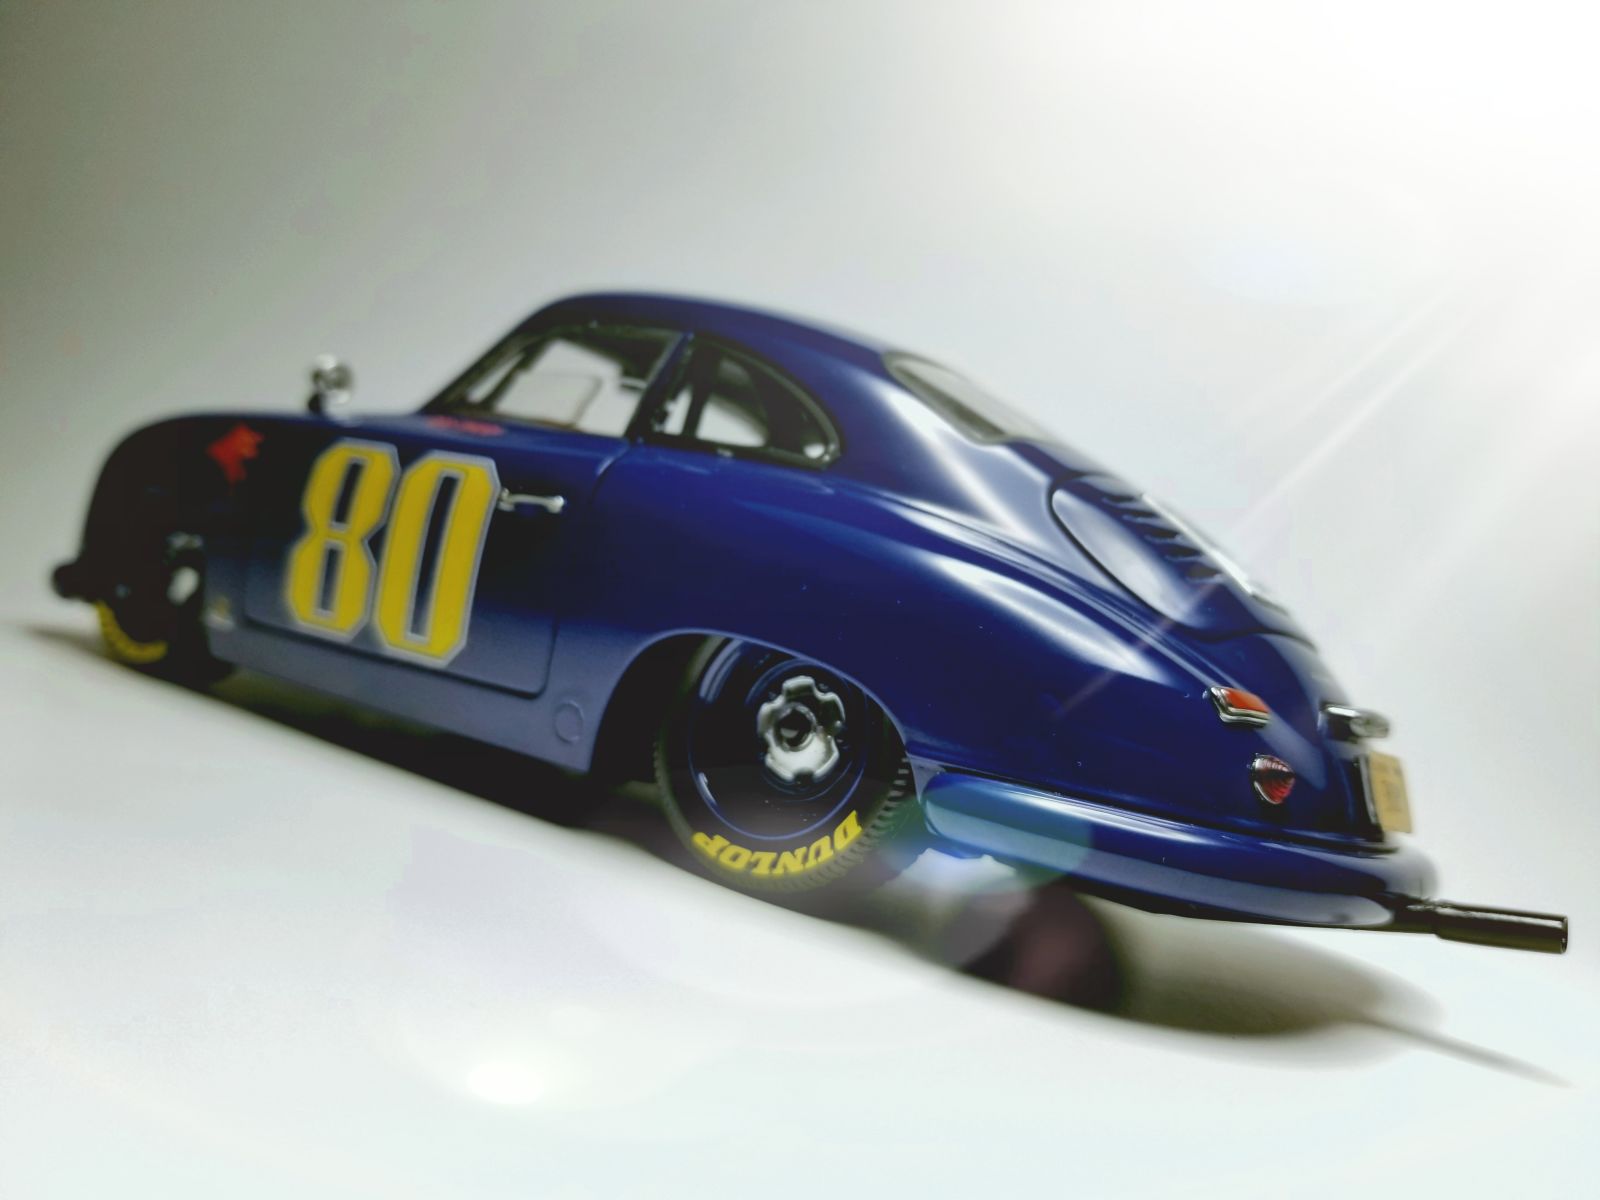 Illustration for article titled Rennsport Reunion: The Outlaw